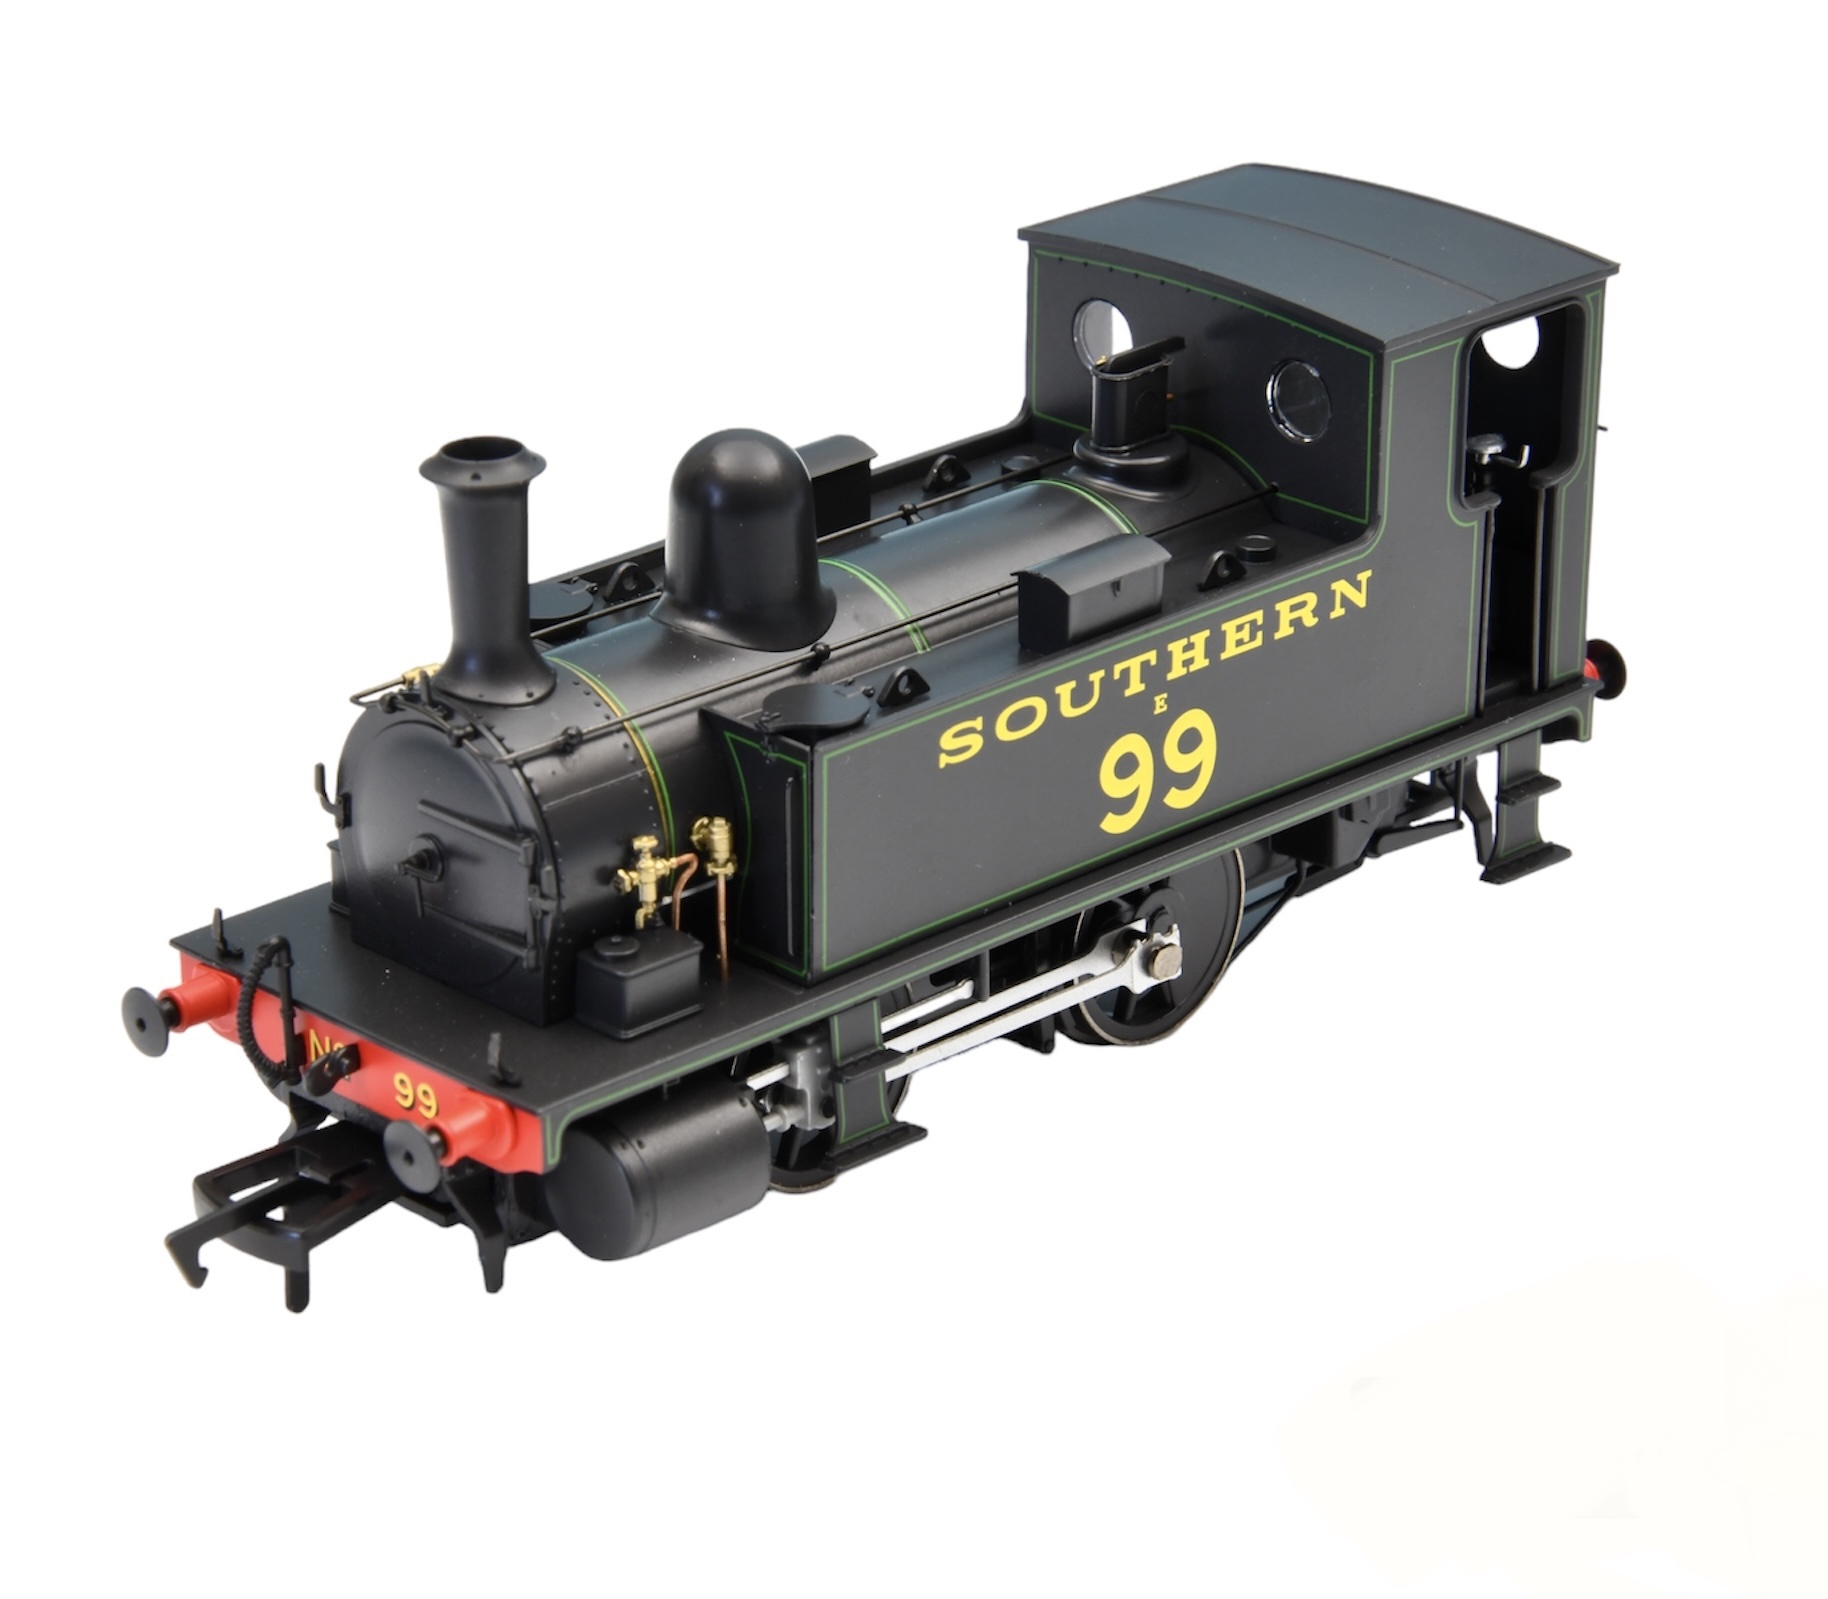 4S-018-015 B4 0-4-0T Southern Black lined 99